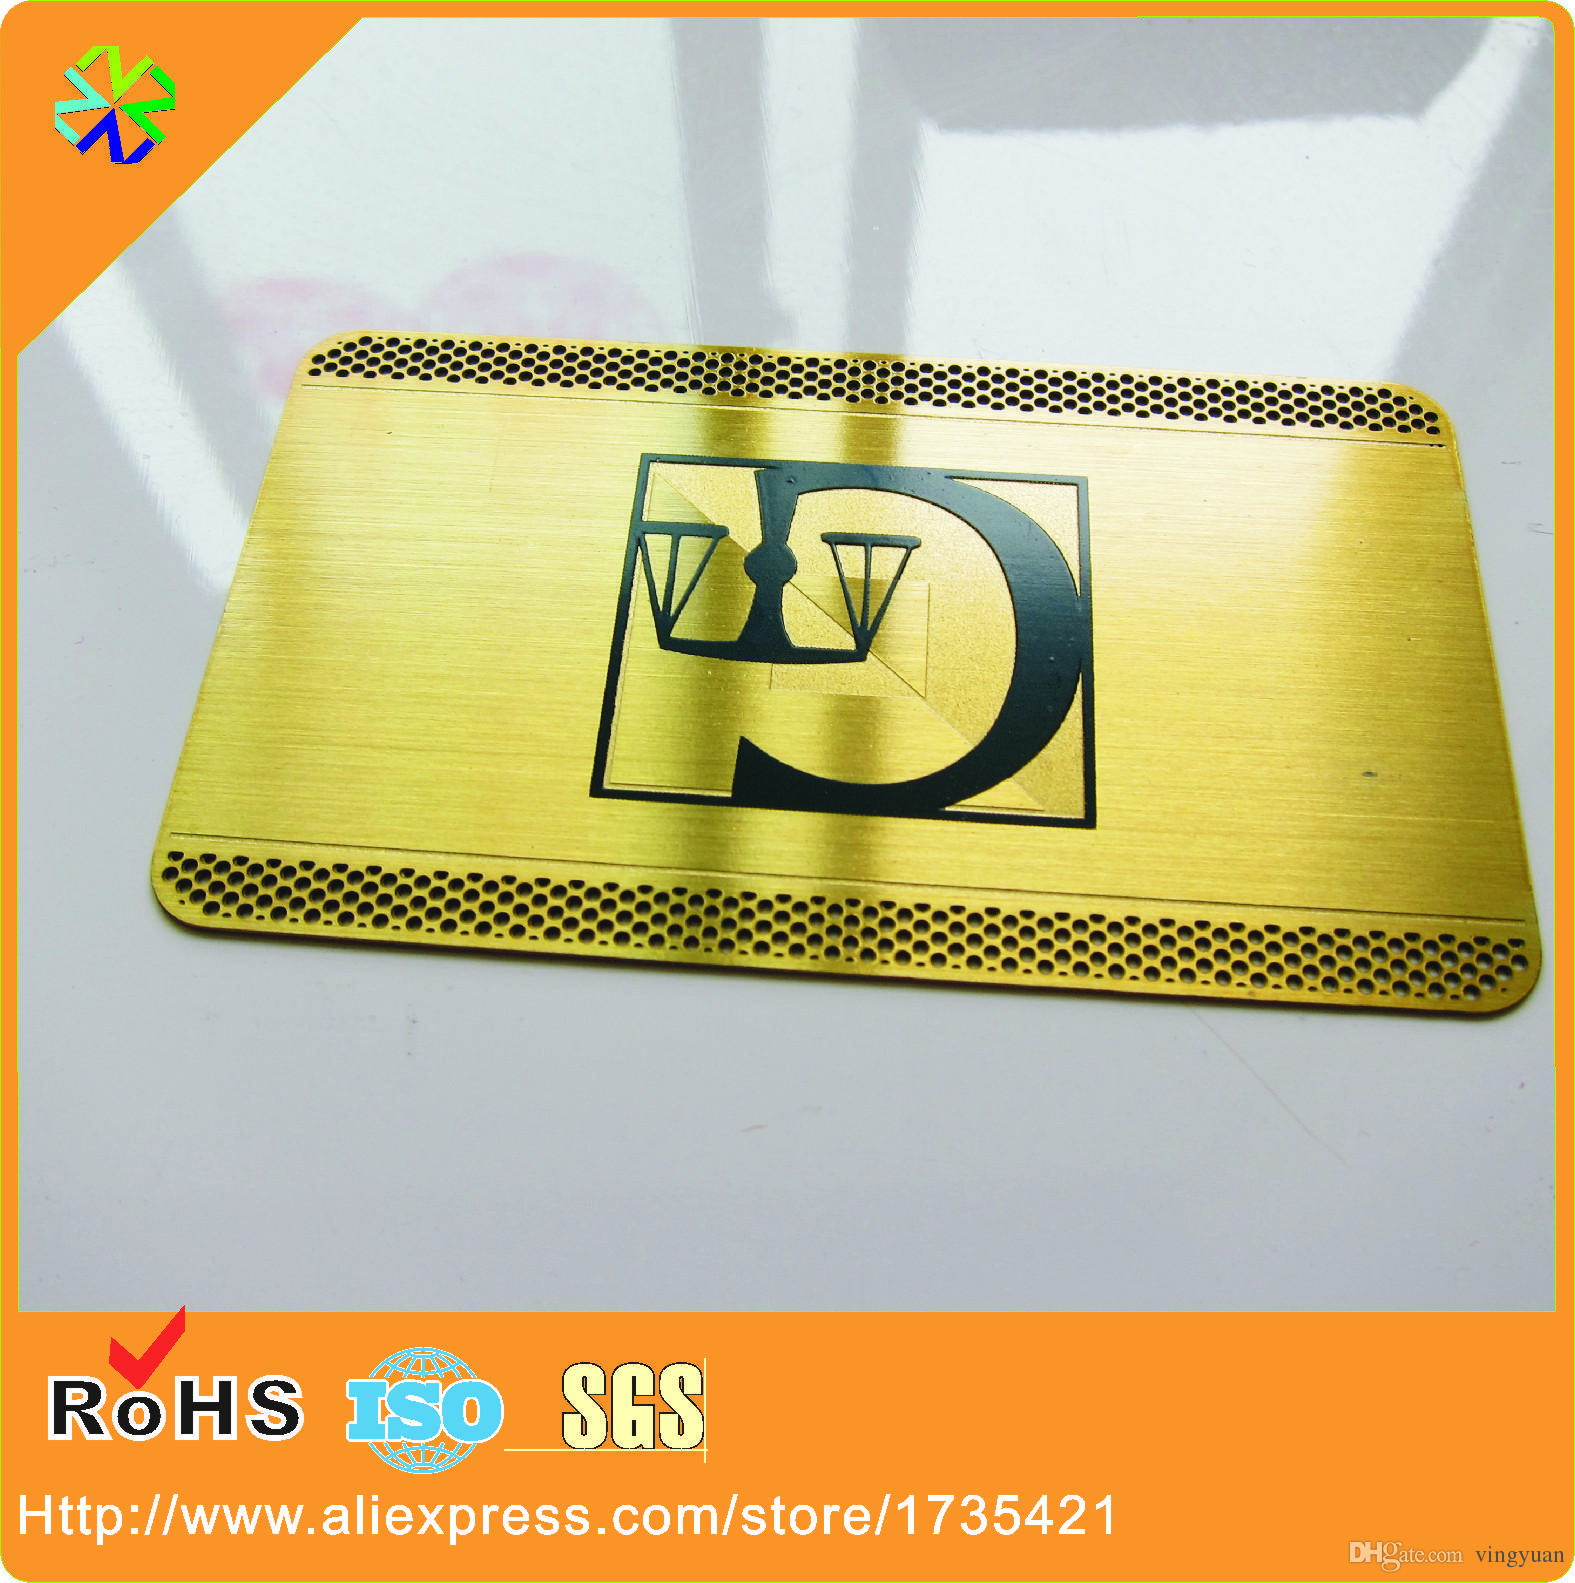 Quality Gold Logo - 2019 High Quality Gold Plated OEM Metal Business Card Engraved Logo ...